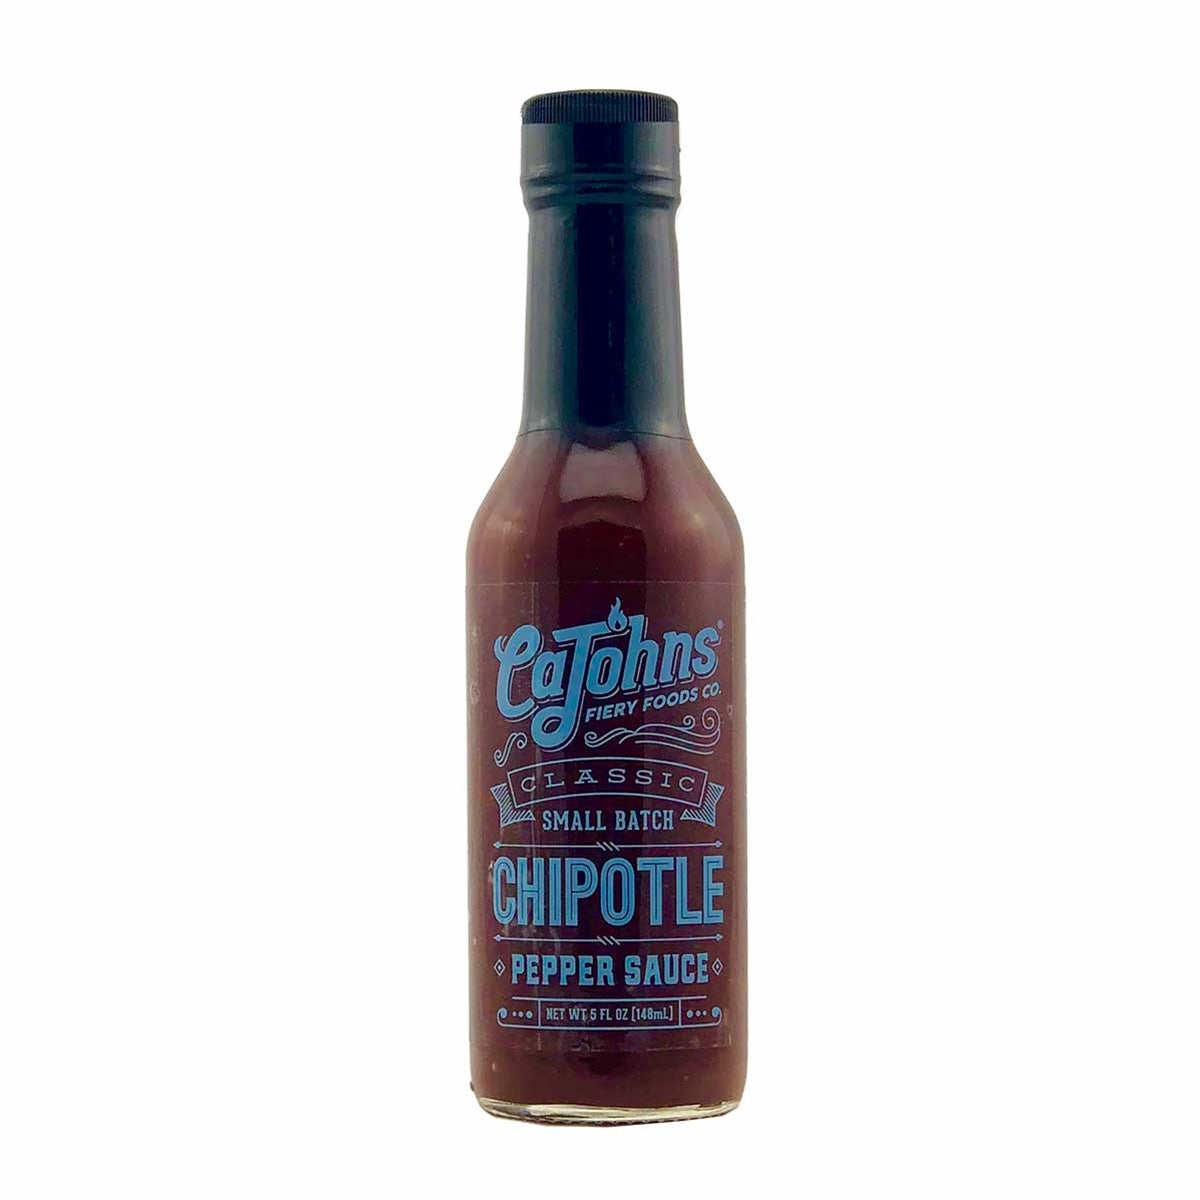 Cajohns Classic Chipotle Pepper Sauce